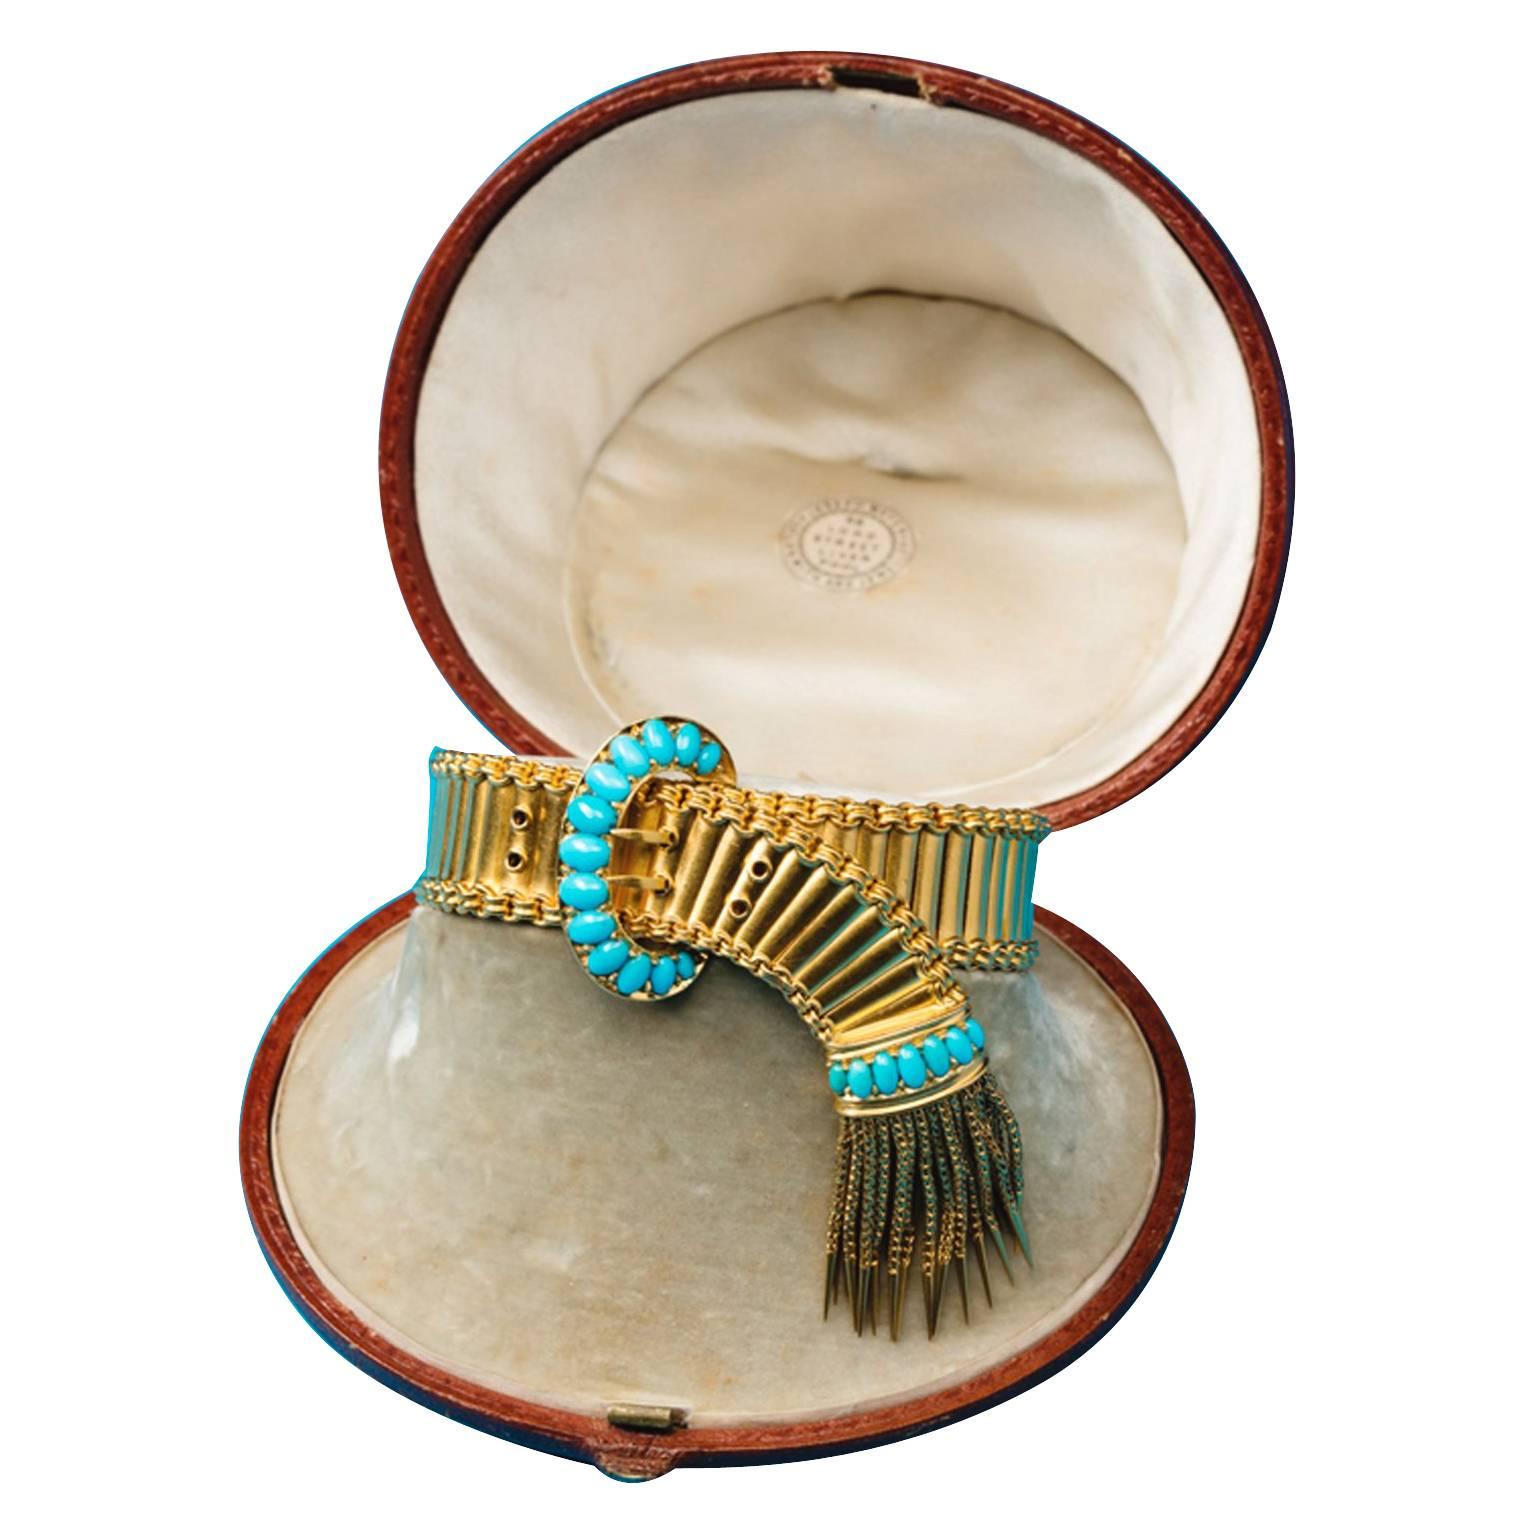 An 18-carat gold buckle bracelet, the central buckle is set with graduated cabochon cut turquoises, the end has a band of turquoises and a gold tassel, England, circa 1870, in its original case.

weight: 47.3 grams
length: 18.5 cm